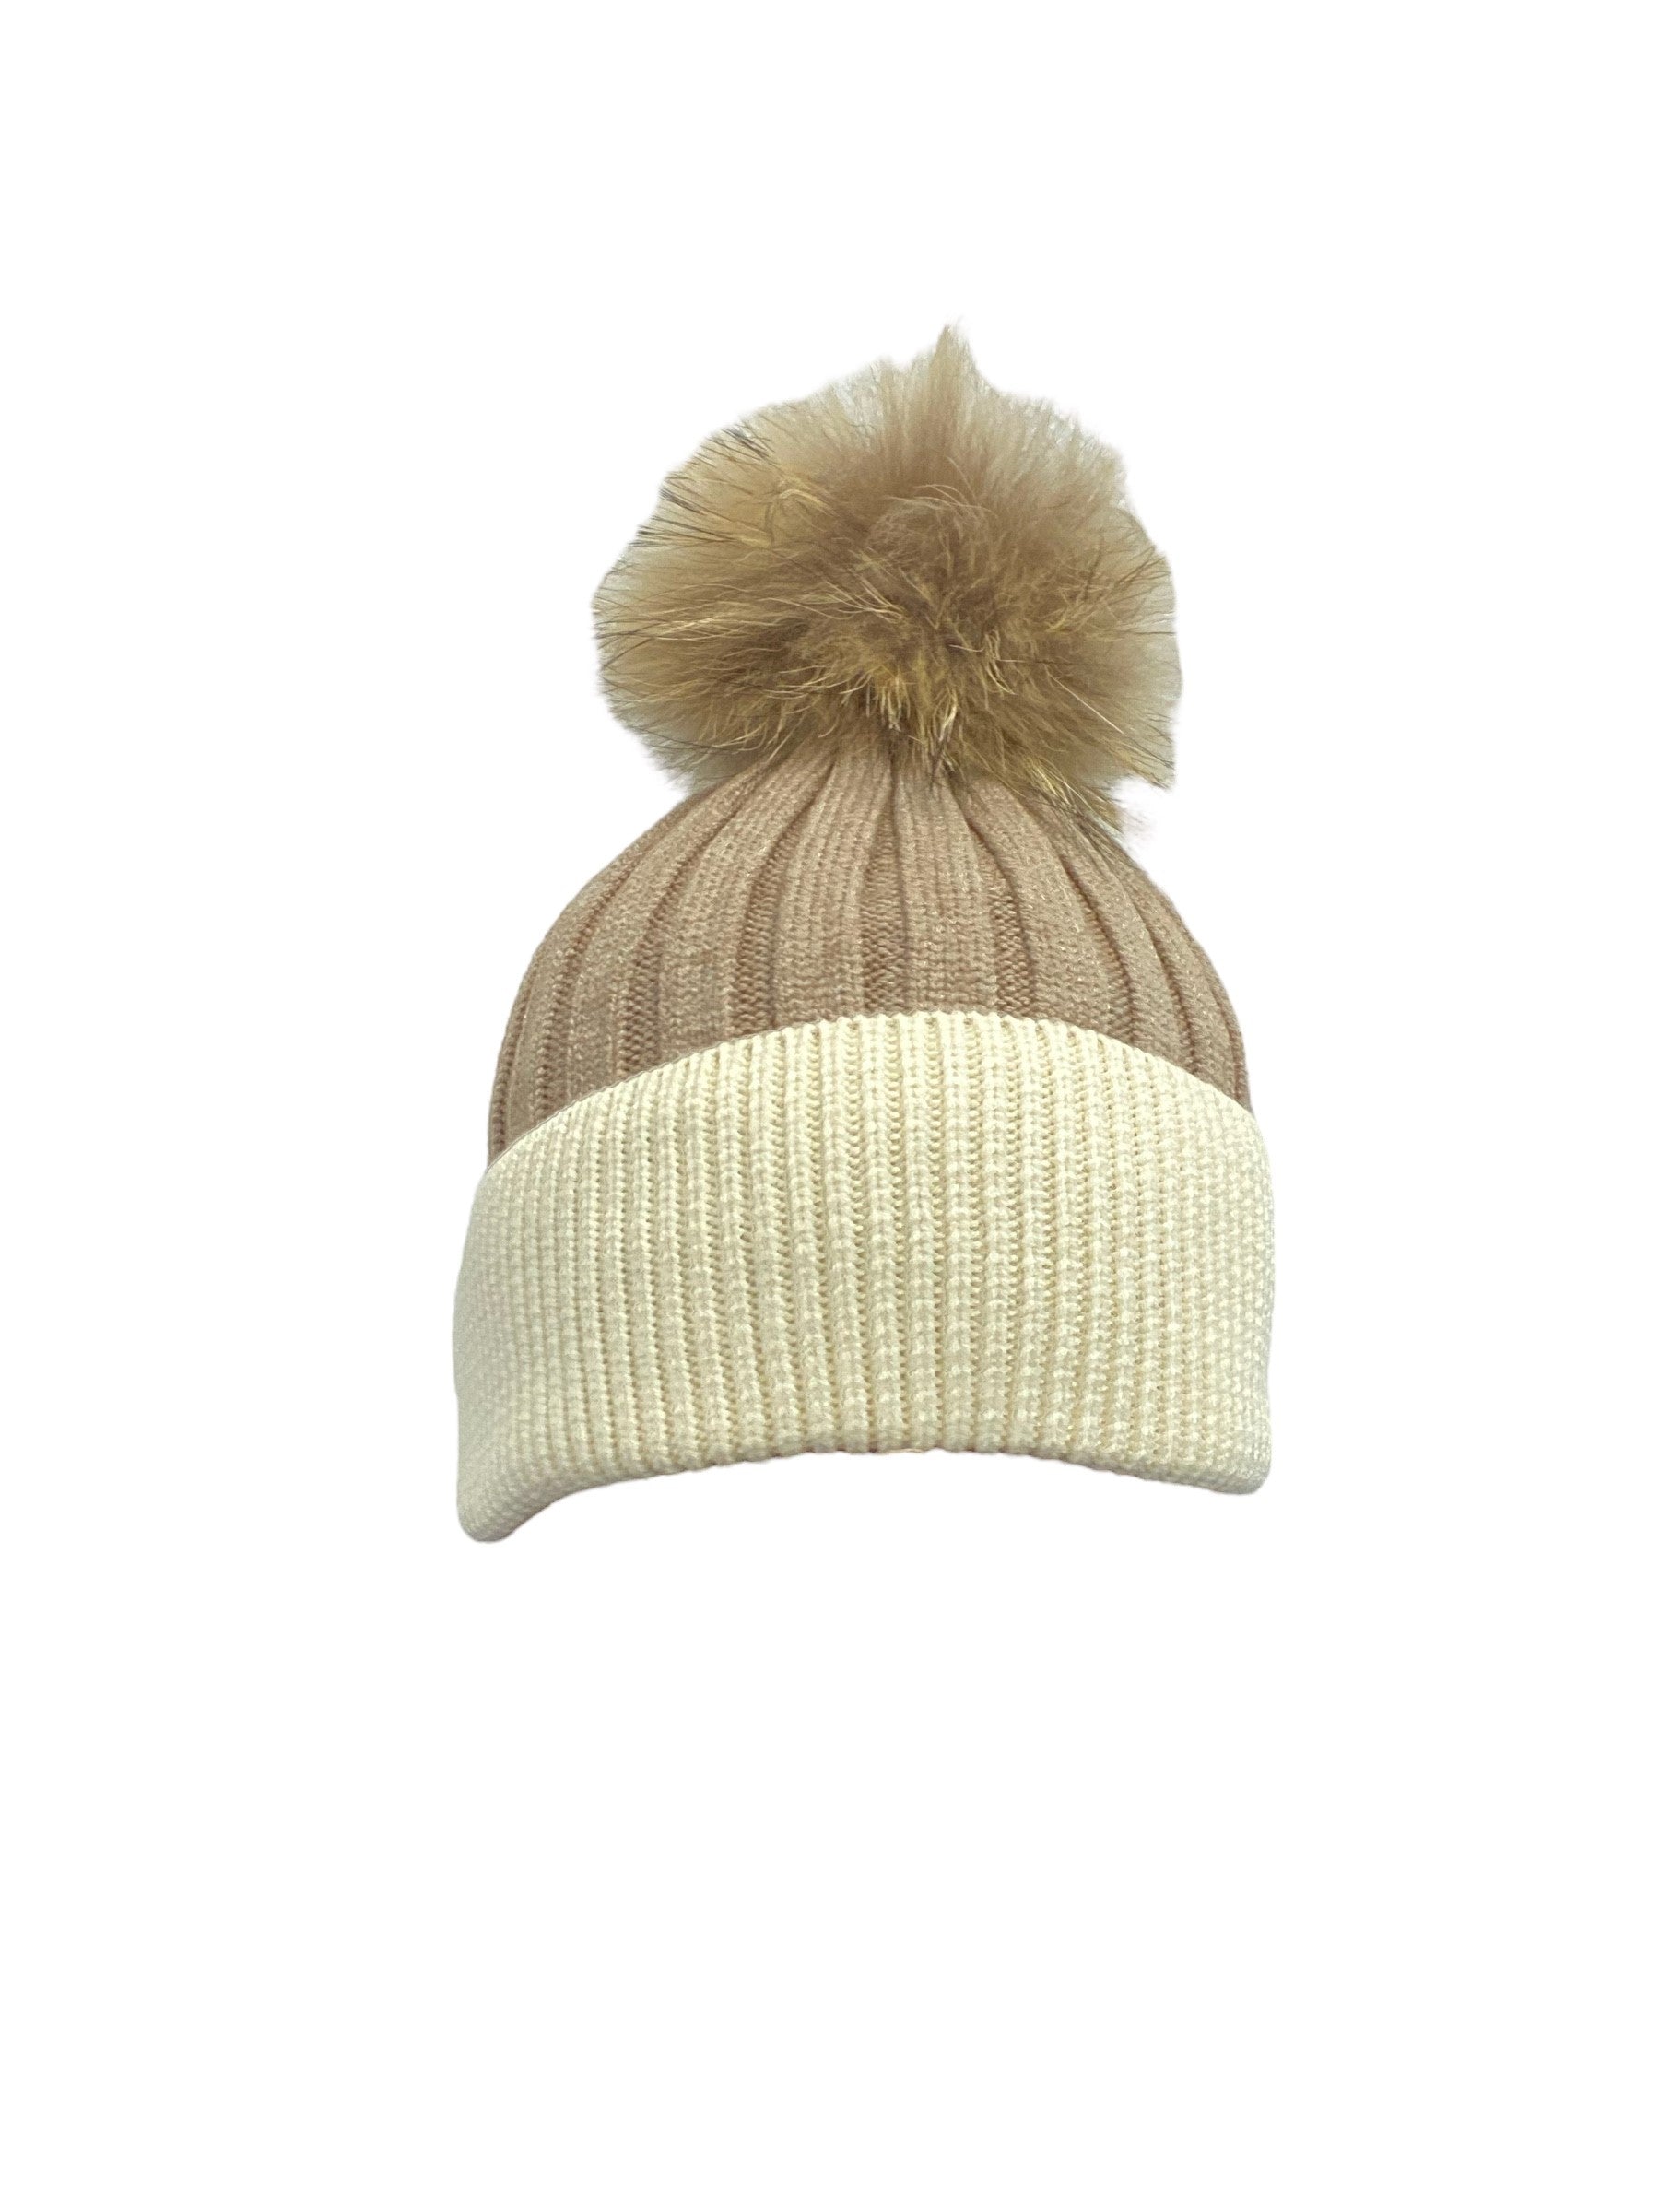 Turfmaster Knitted Hat 2 Colour and Pom Pom